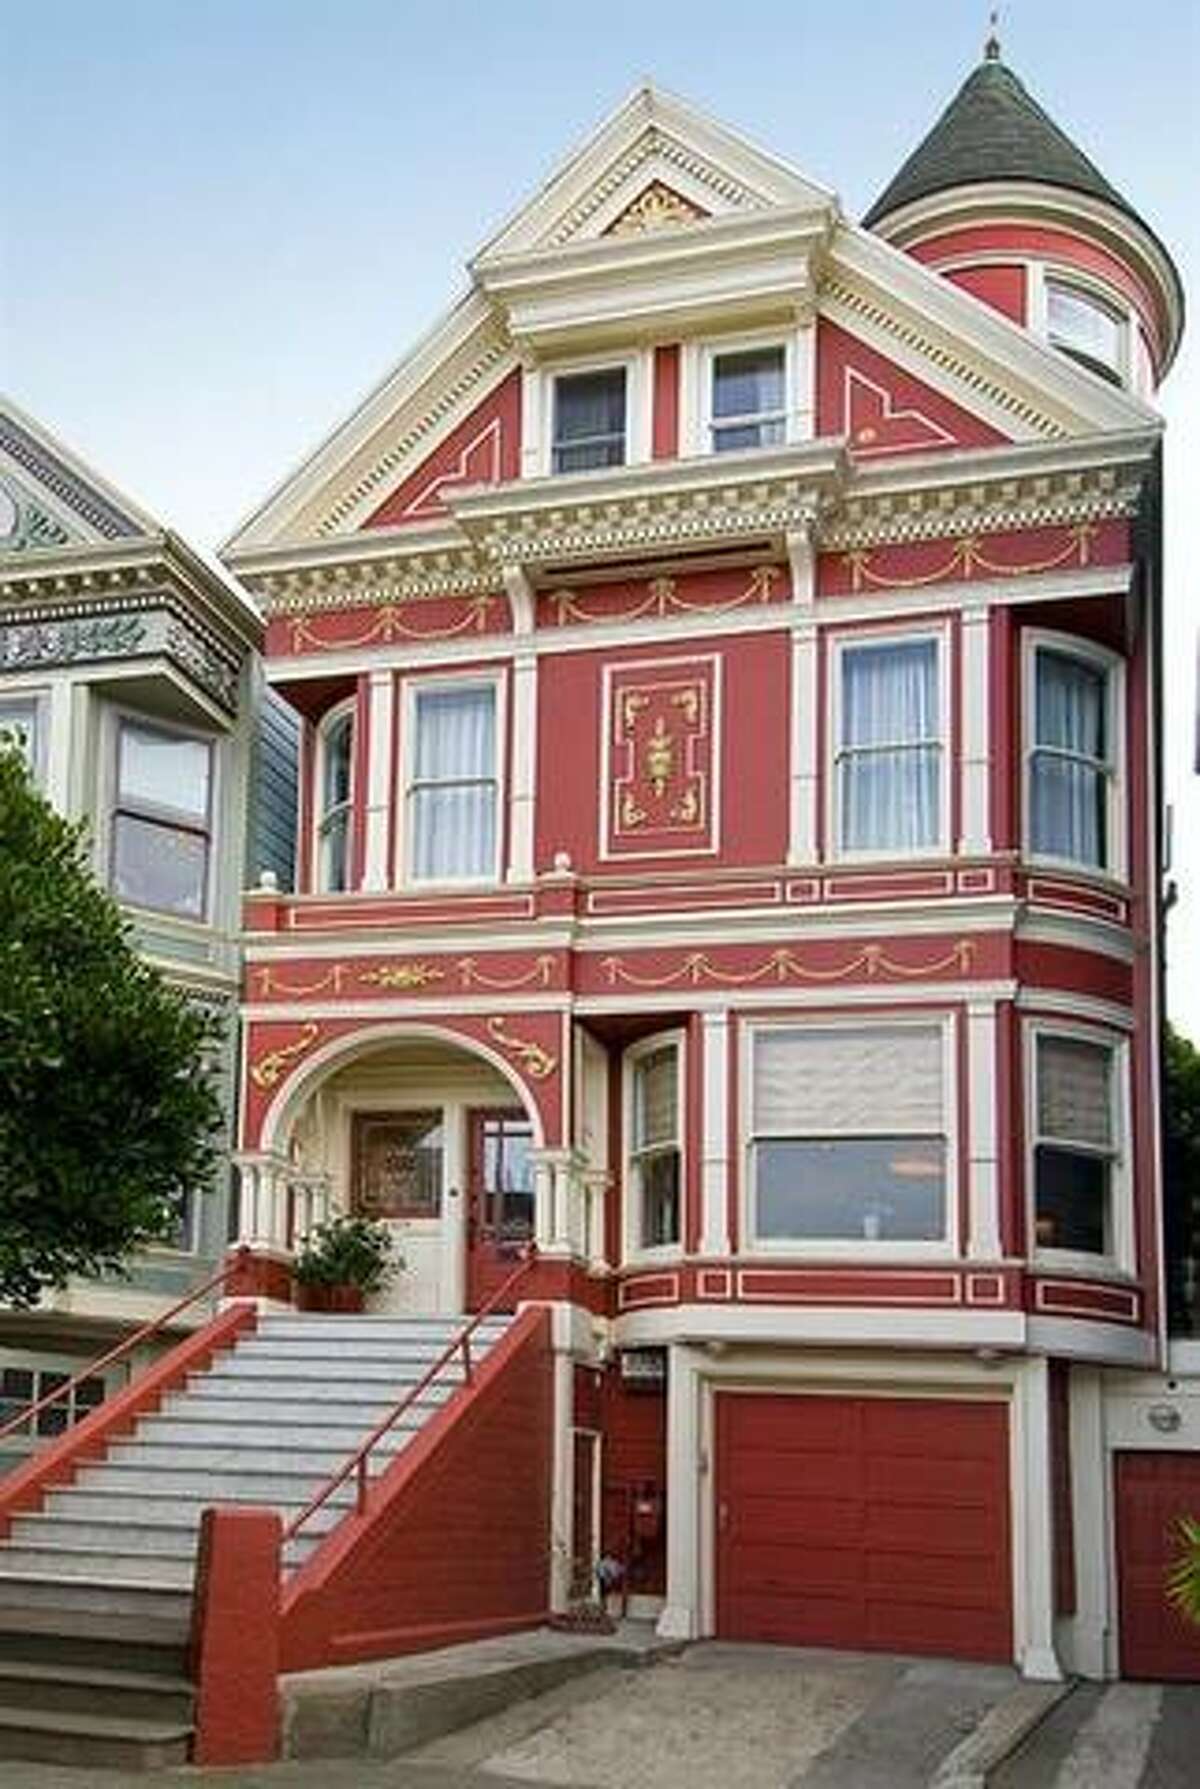 The "Fall" home, two doors down at 1333 Waller, is finished in a deep red and gold, and embellished with leaves. This five-bedroom, 2.5-bathroom home last sold for $1,725,000 in June 2009. The house was damaged by a fire in 2013 but survived the blaze.